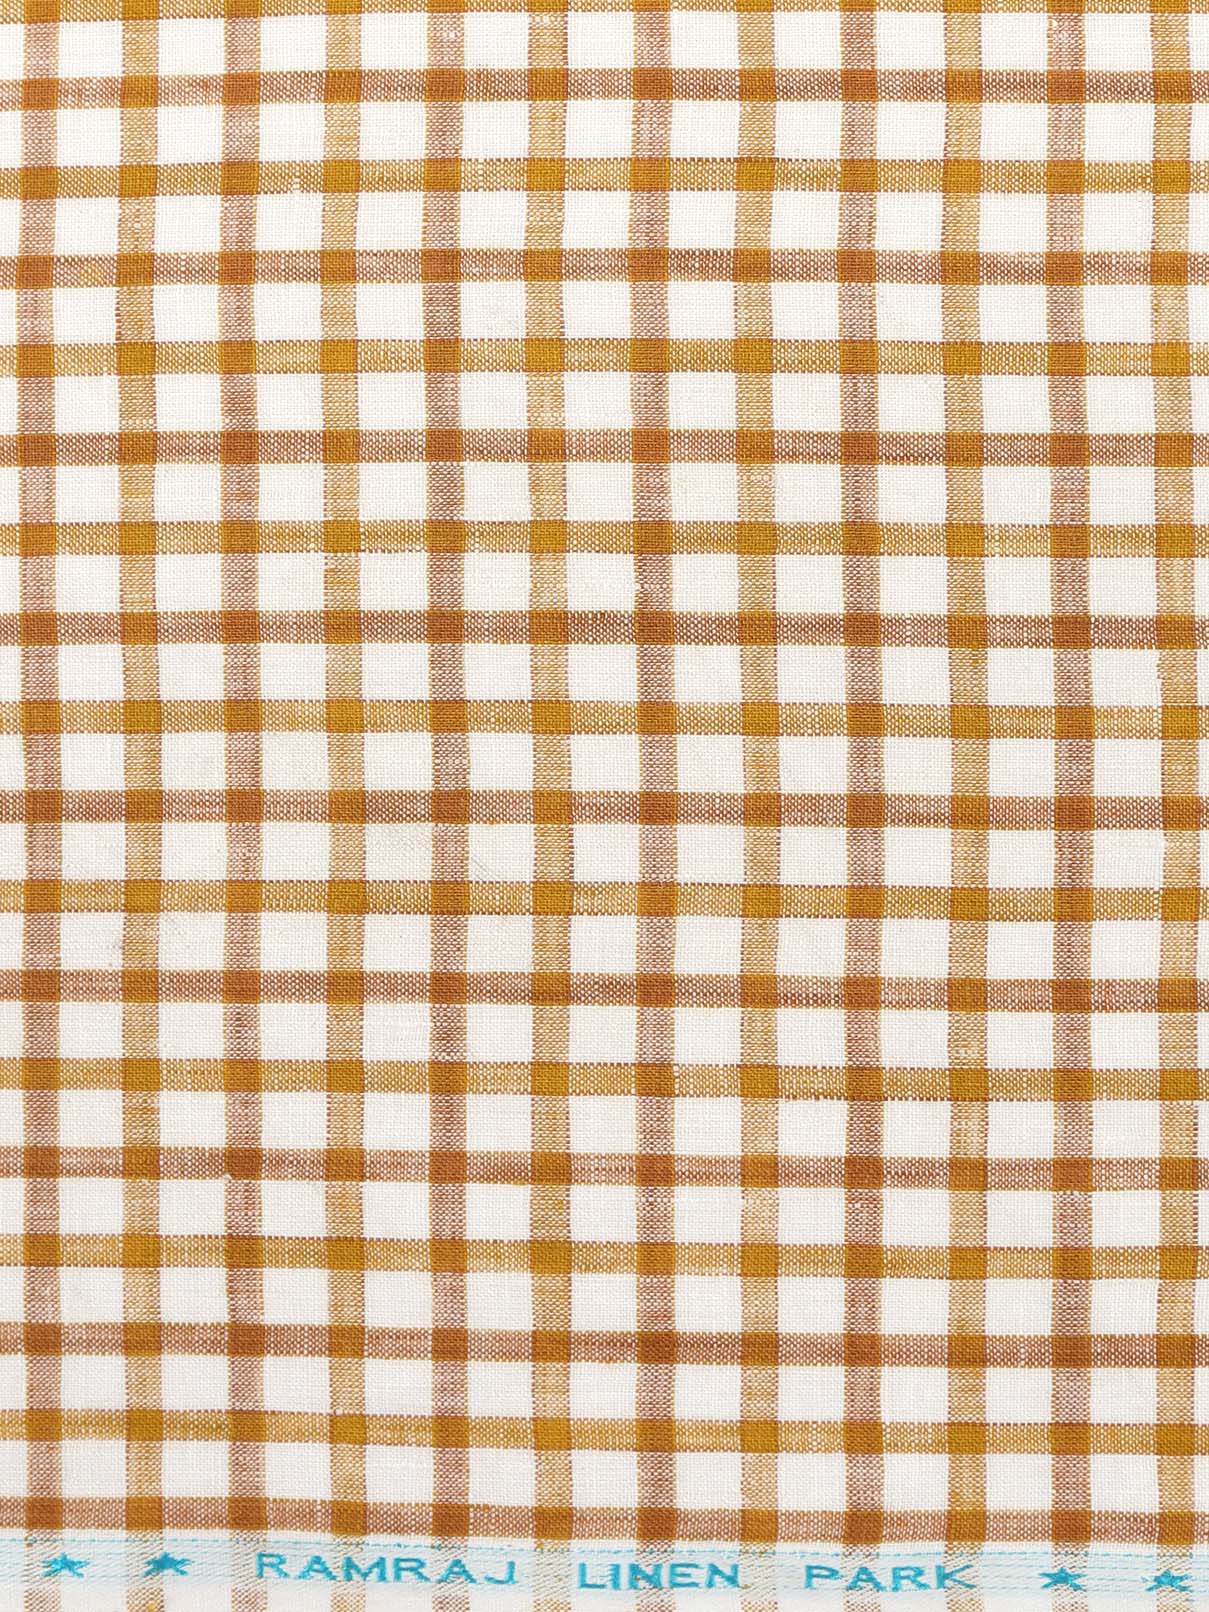 Pure Linen Sandal and White Colour Check Shirt Fabric Texena-Zoom view